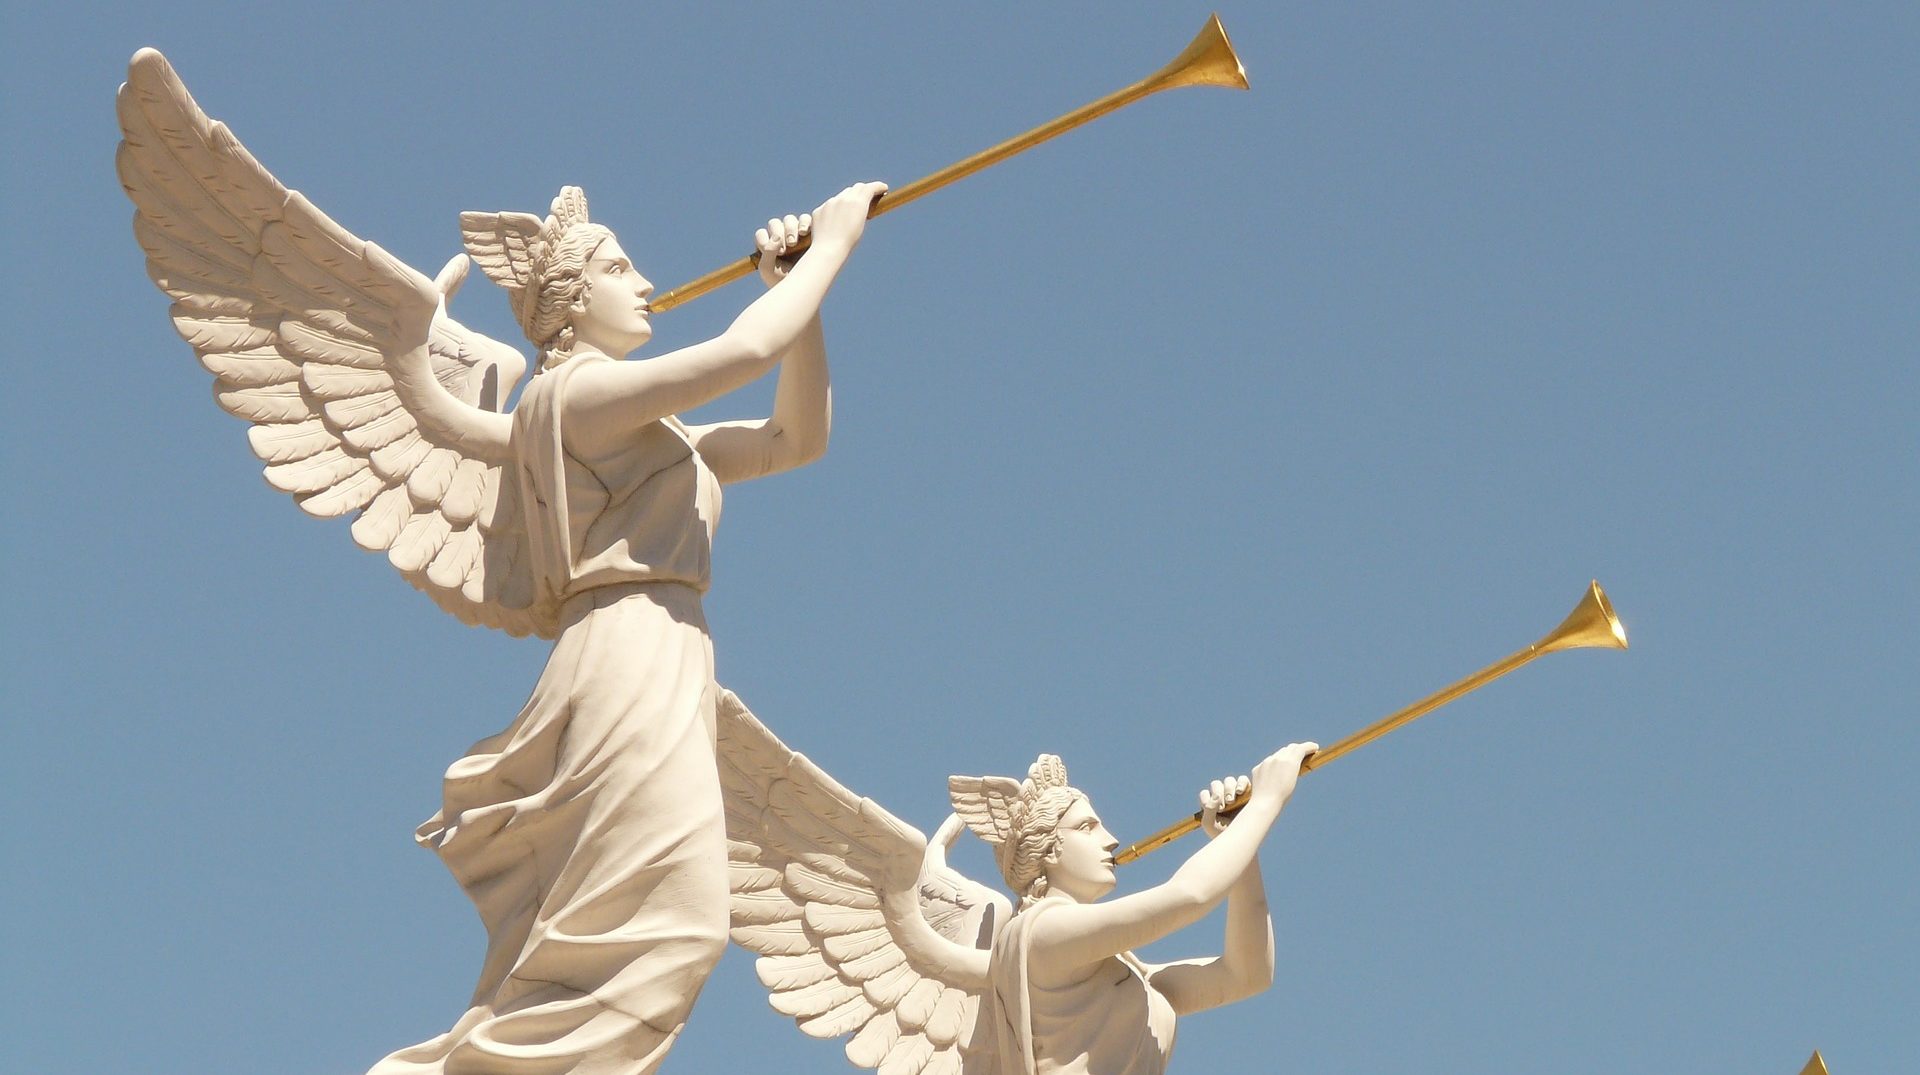 Angels blow on trumpets
